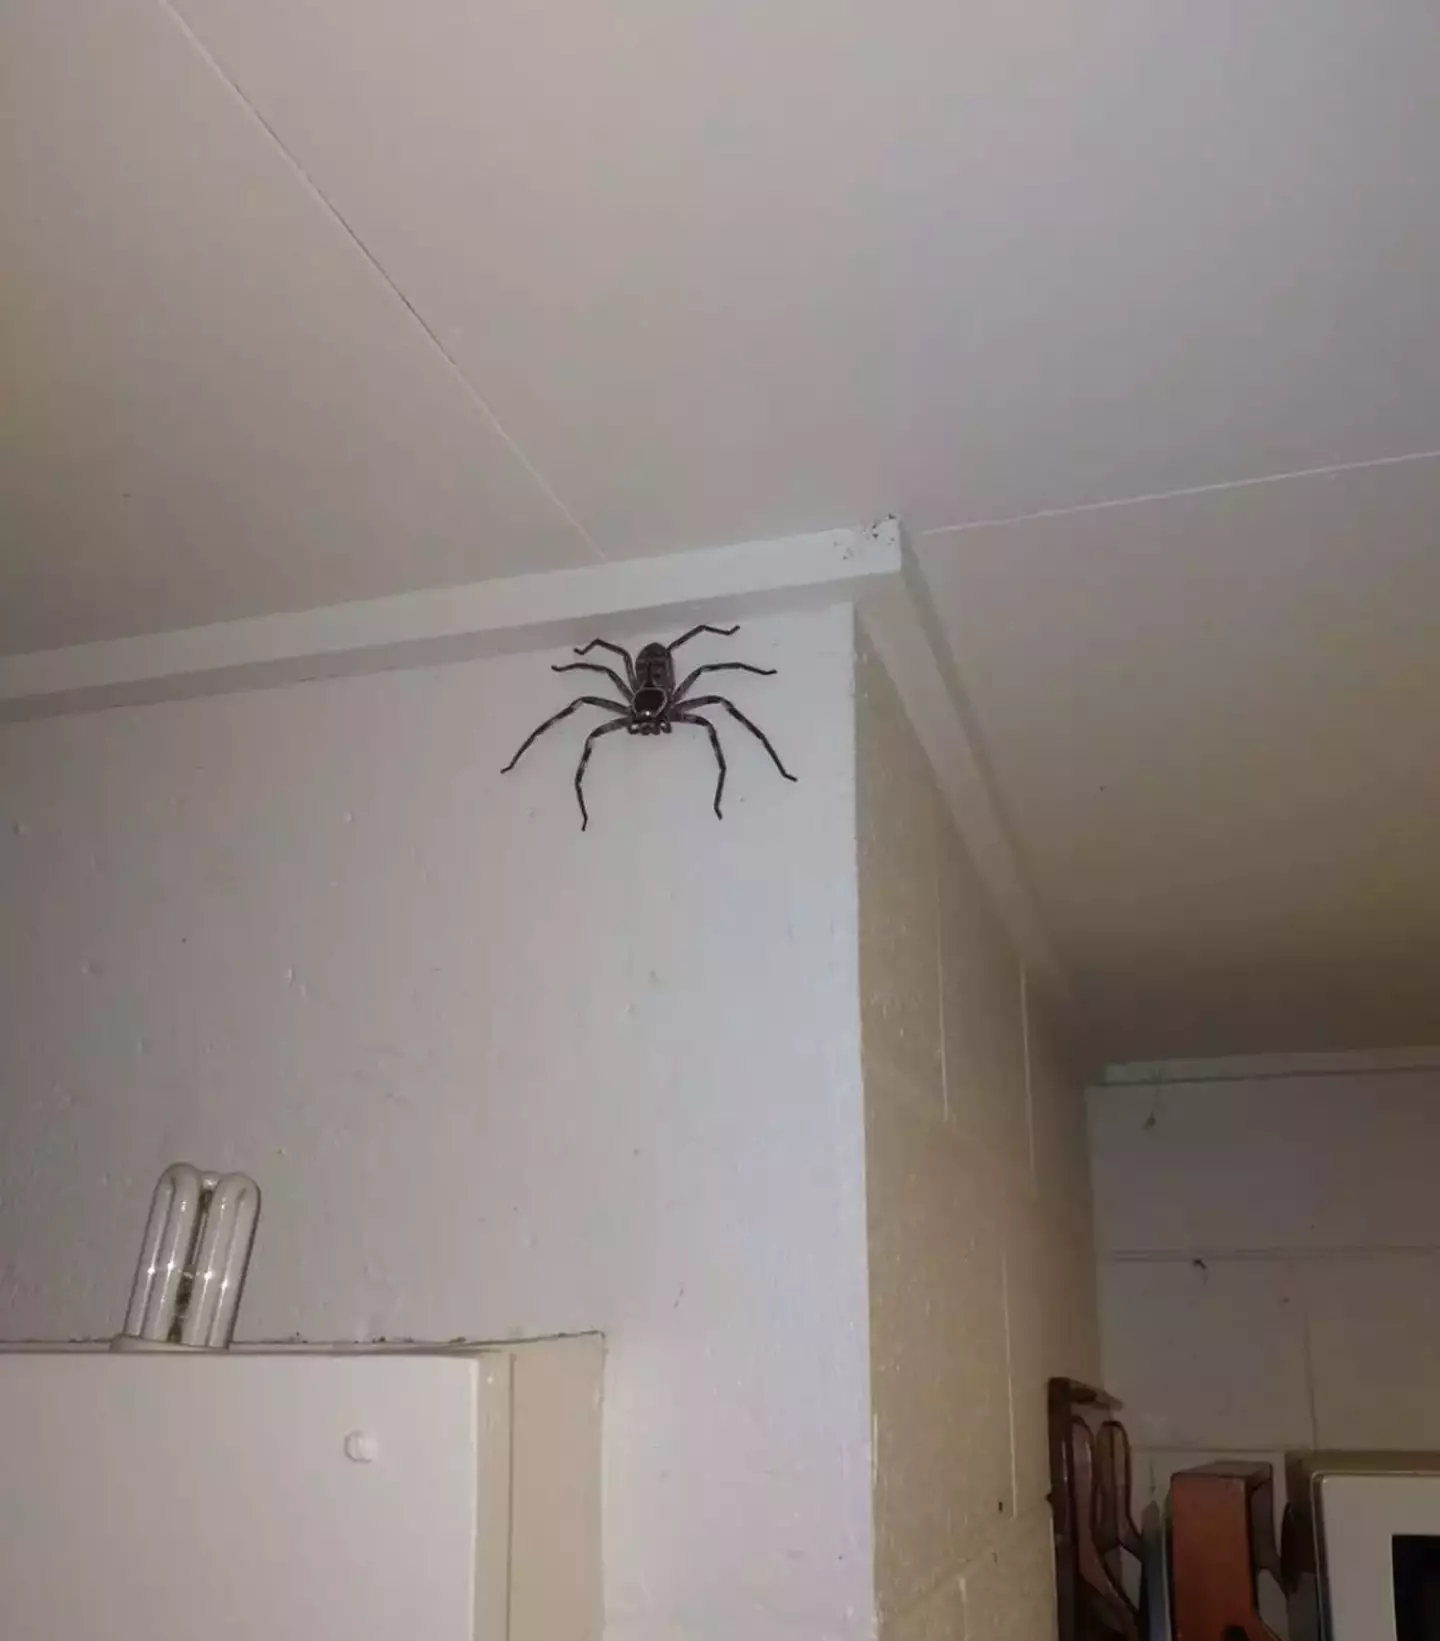 The Aussie family lived with this eight-legged beast for a year. Big yikes.